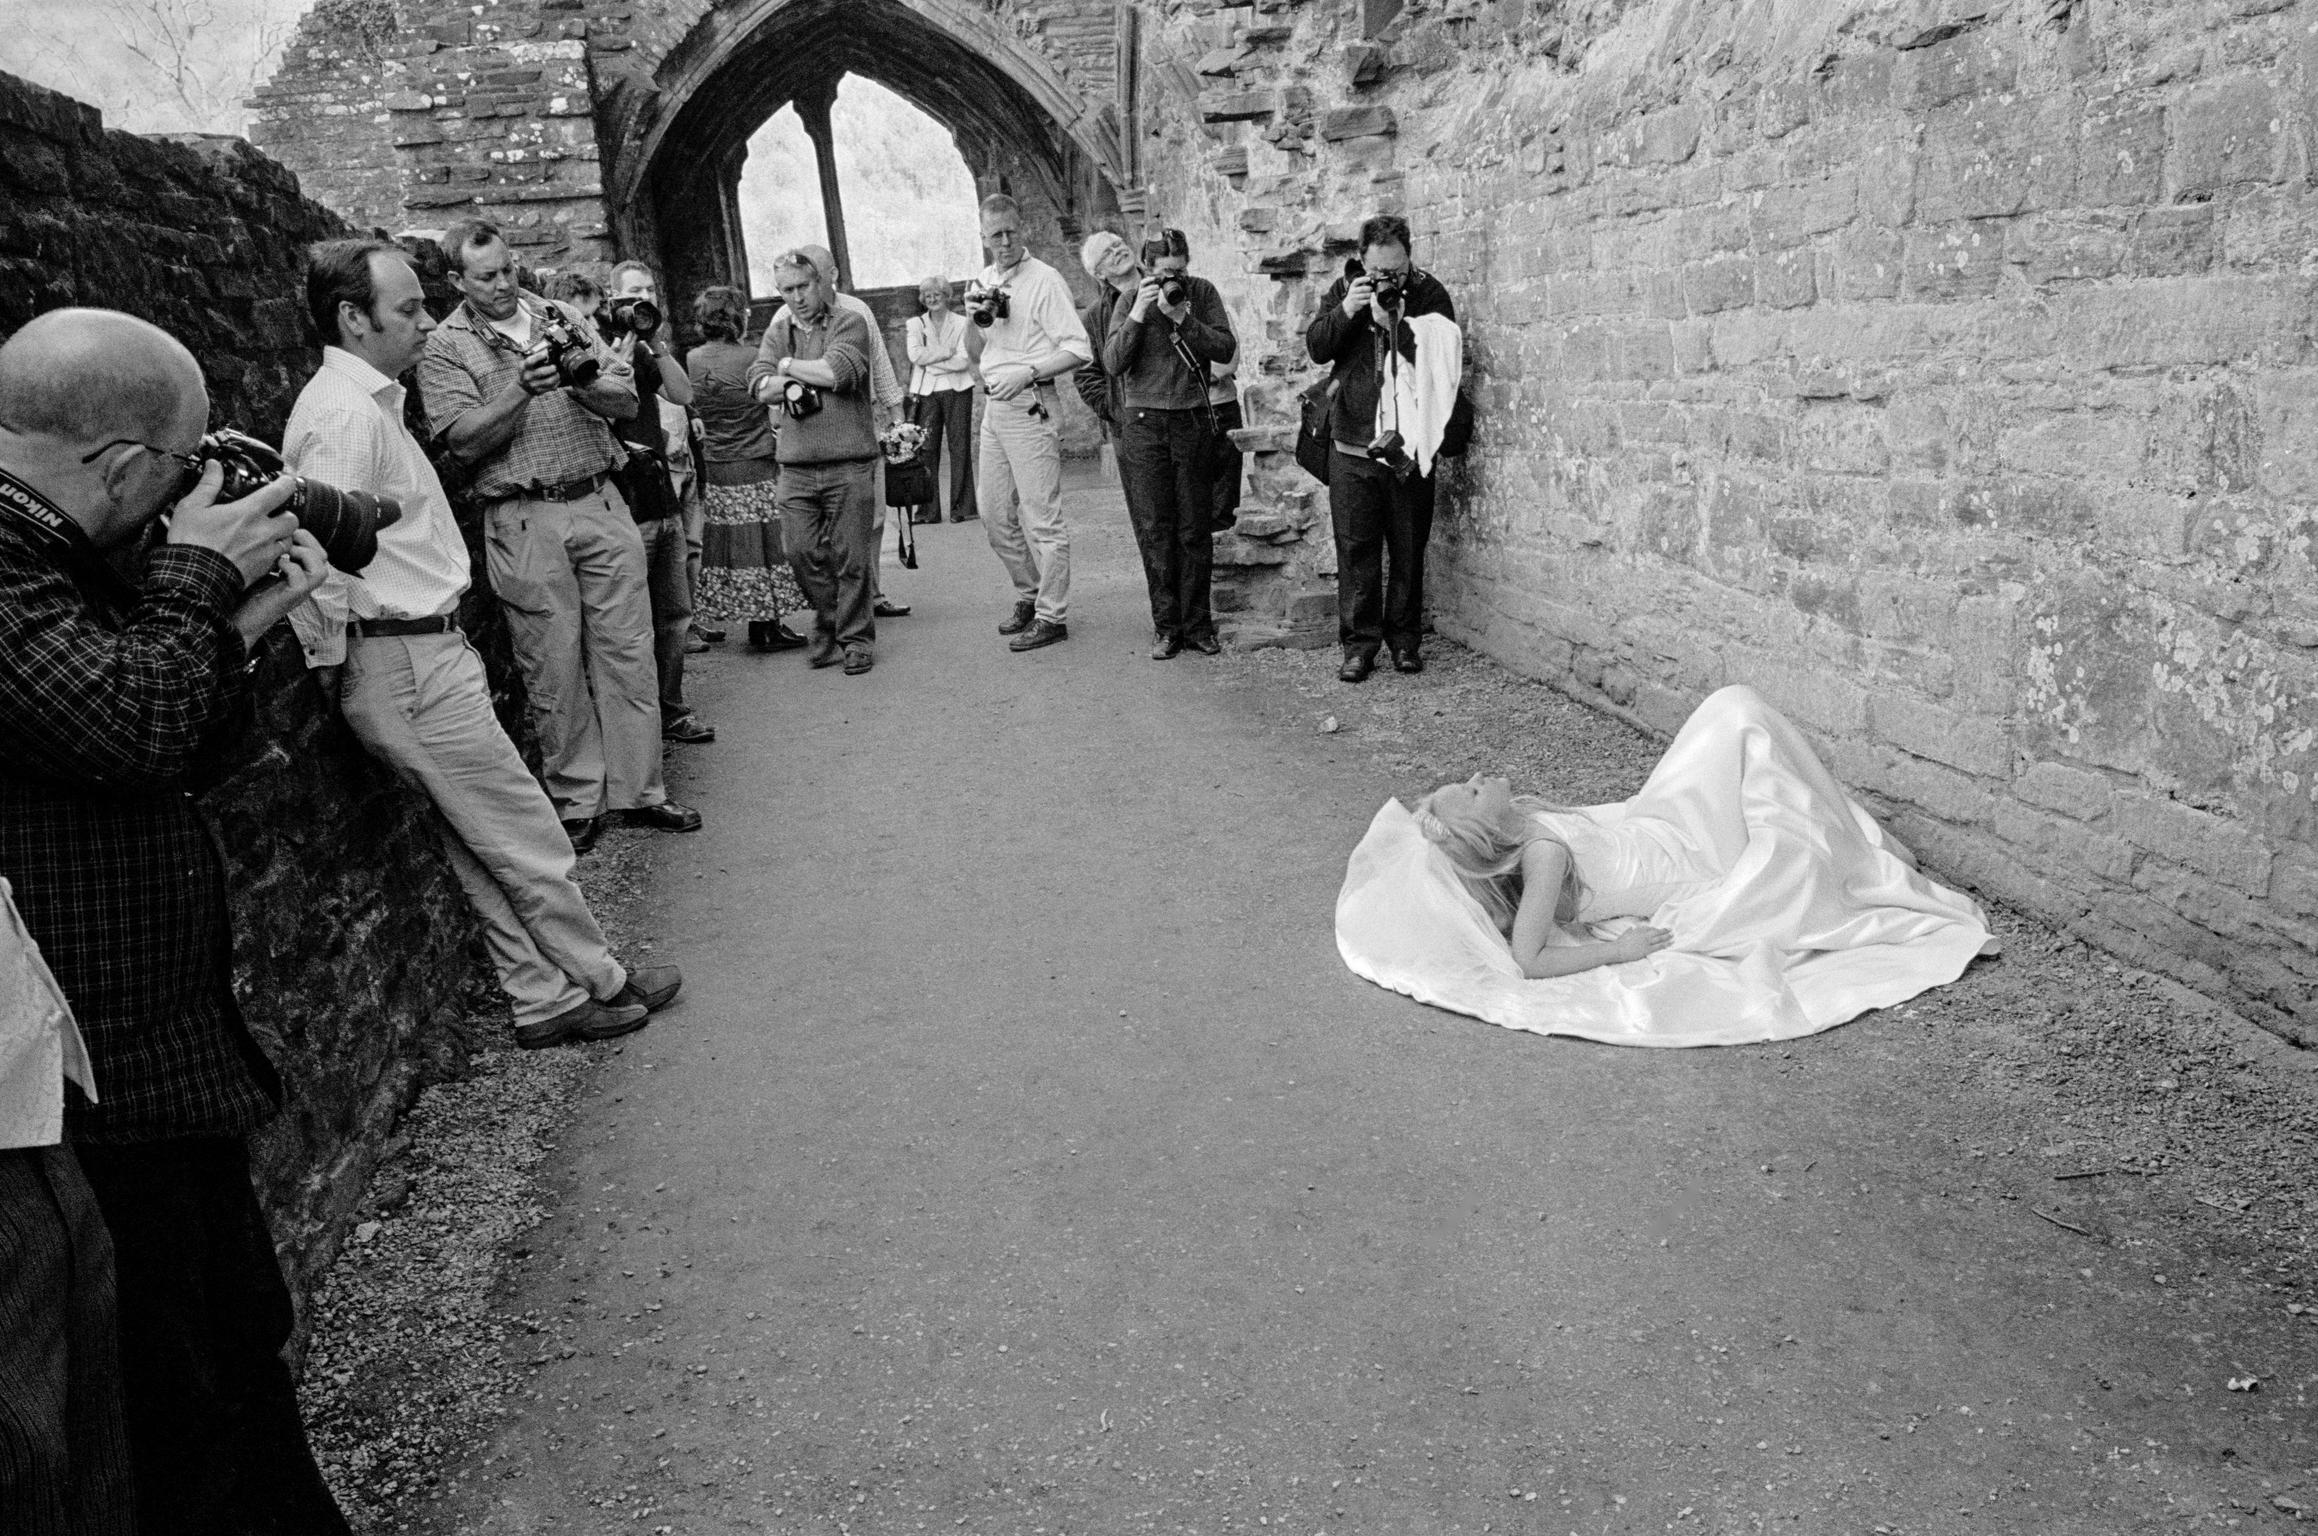 Wedding Photography shooting workshop held in the Abbey. Tintern, Wales